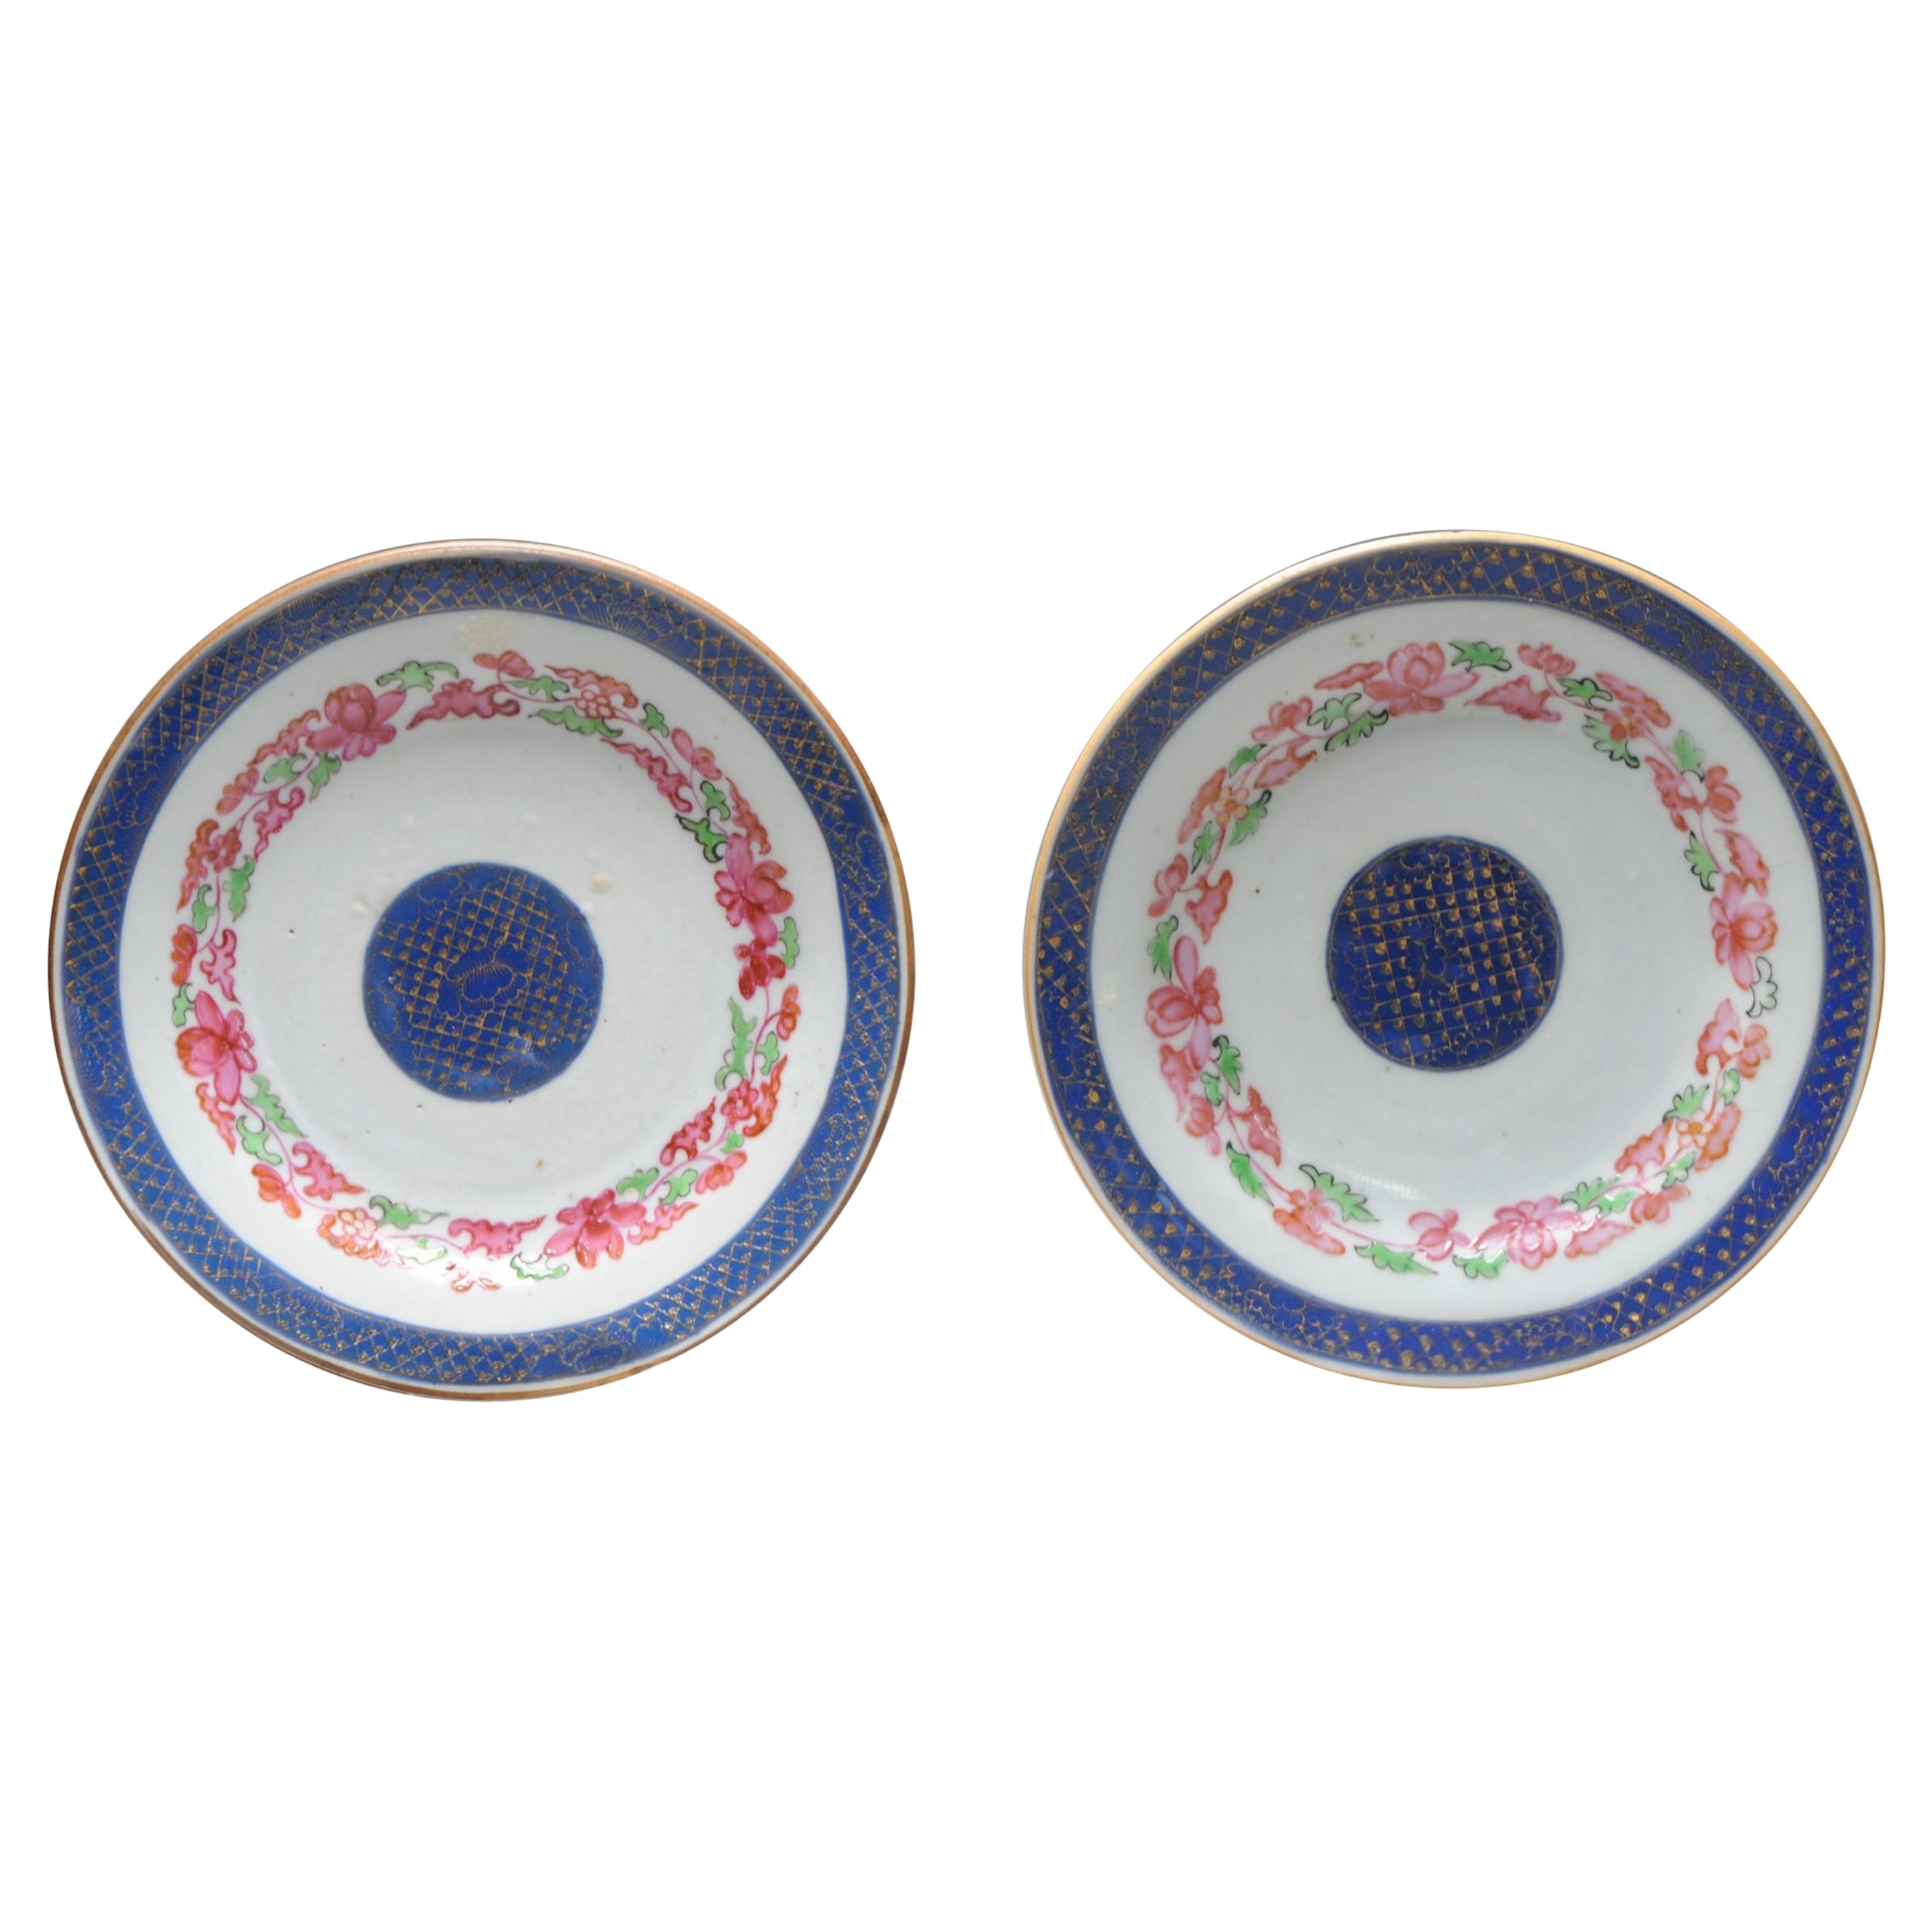 Pair of Chinese Porcelain SE Asia Market Flower Plates, 18th Century For Sale